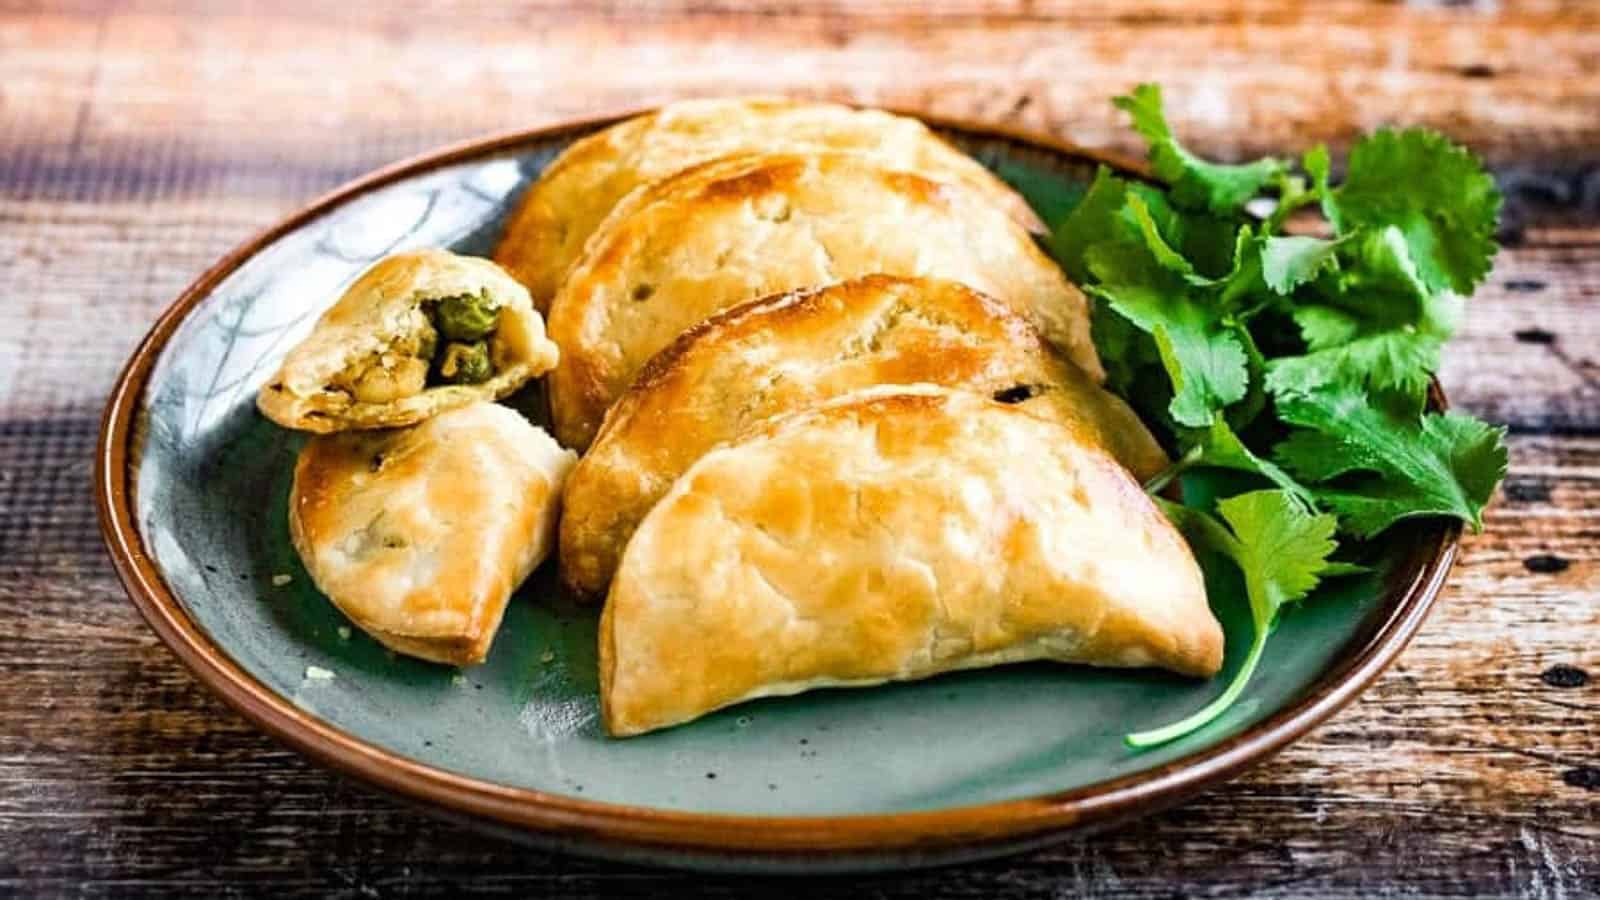 Thai curry puffs filled with ground chicken, potatoes, peas, onions, garlic and spices.